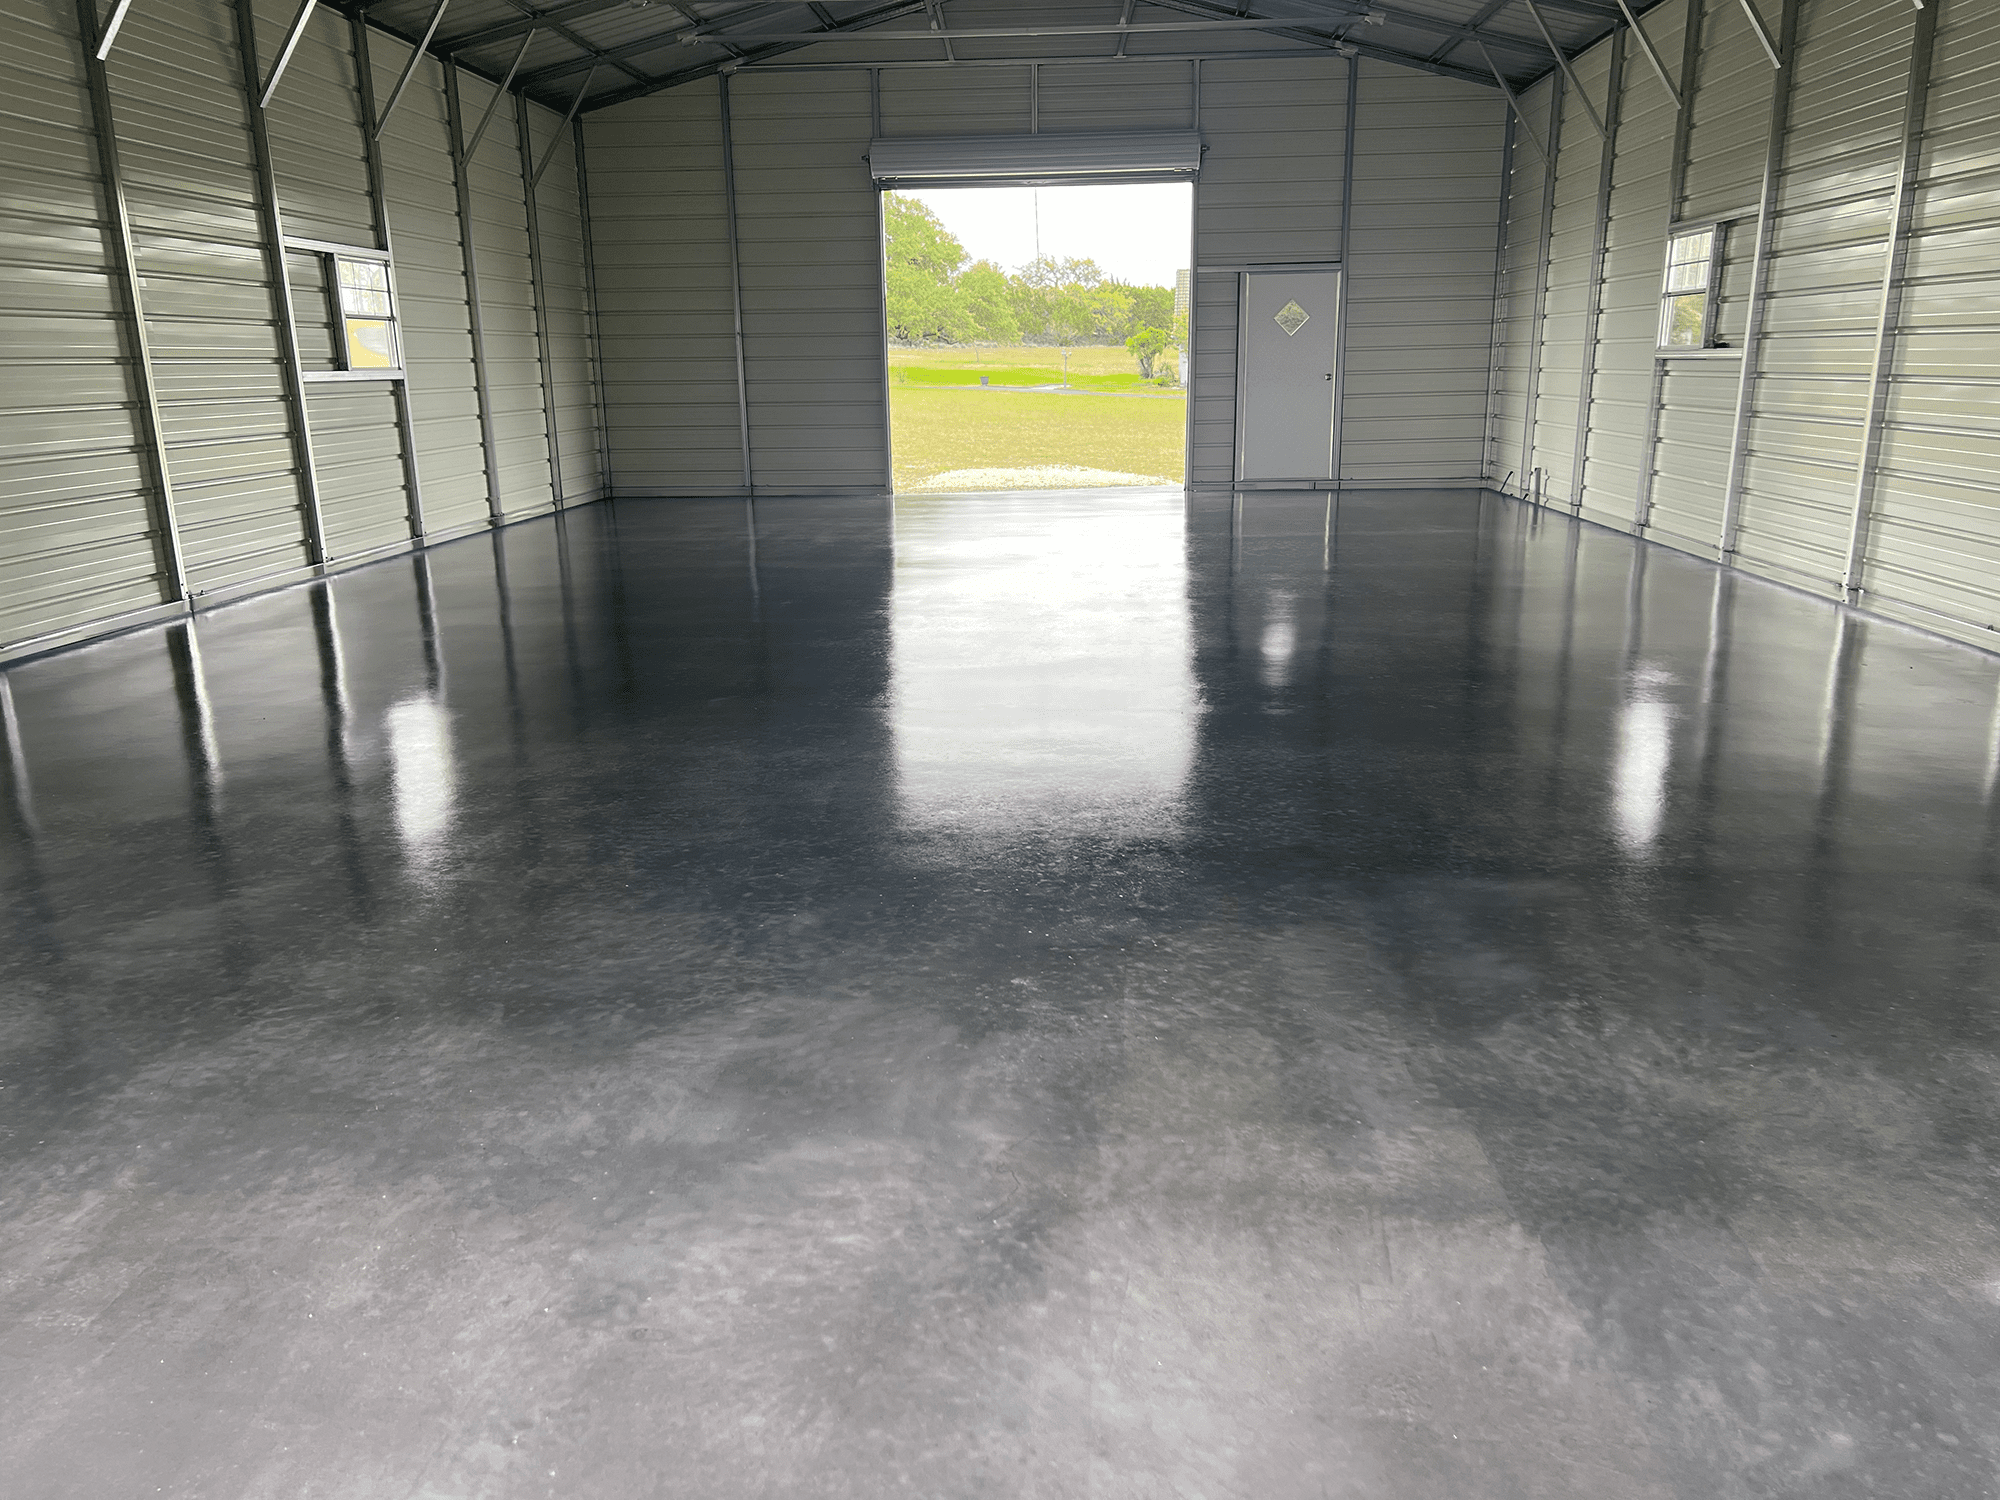 Steel garage floor transformed with a sleek charcoal finish, gleaming in its satin perfection.